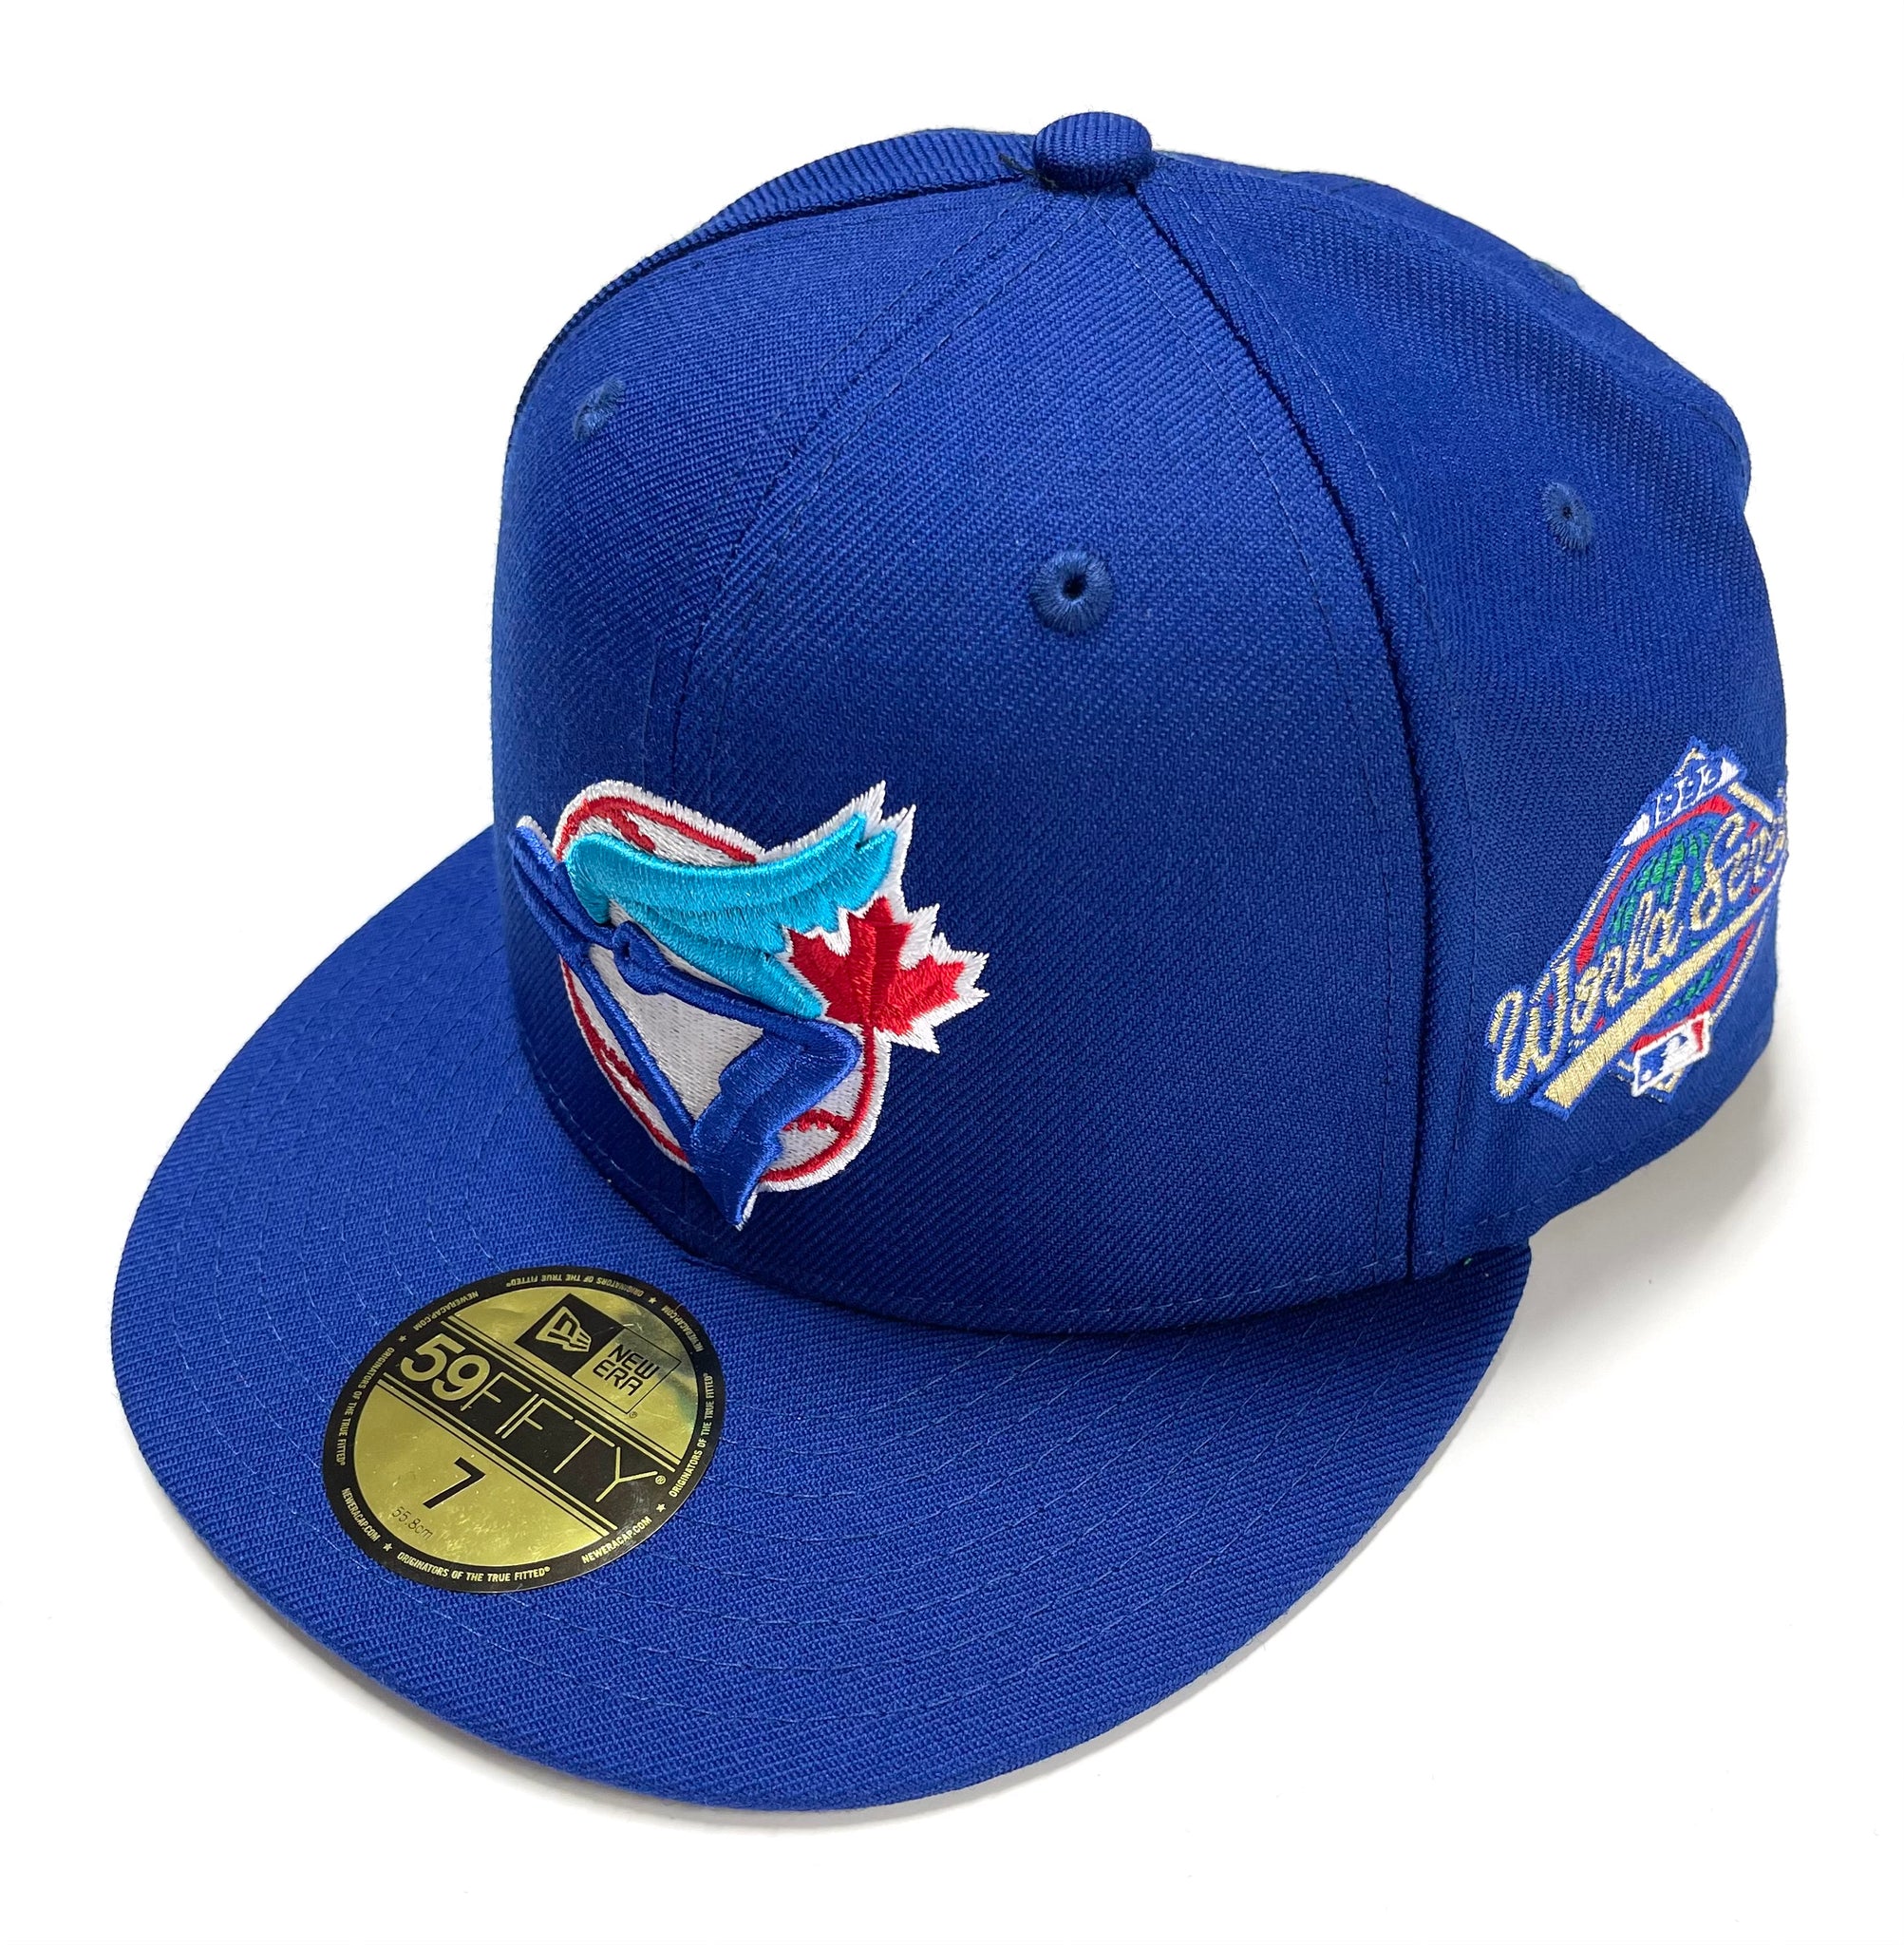 Blue Jays Fitted Hat 